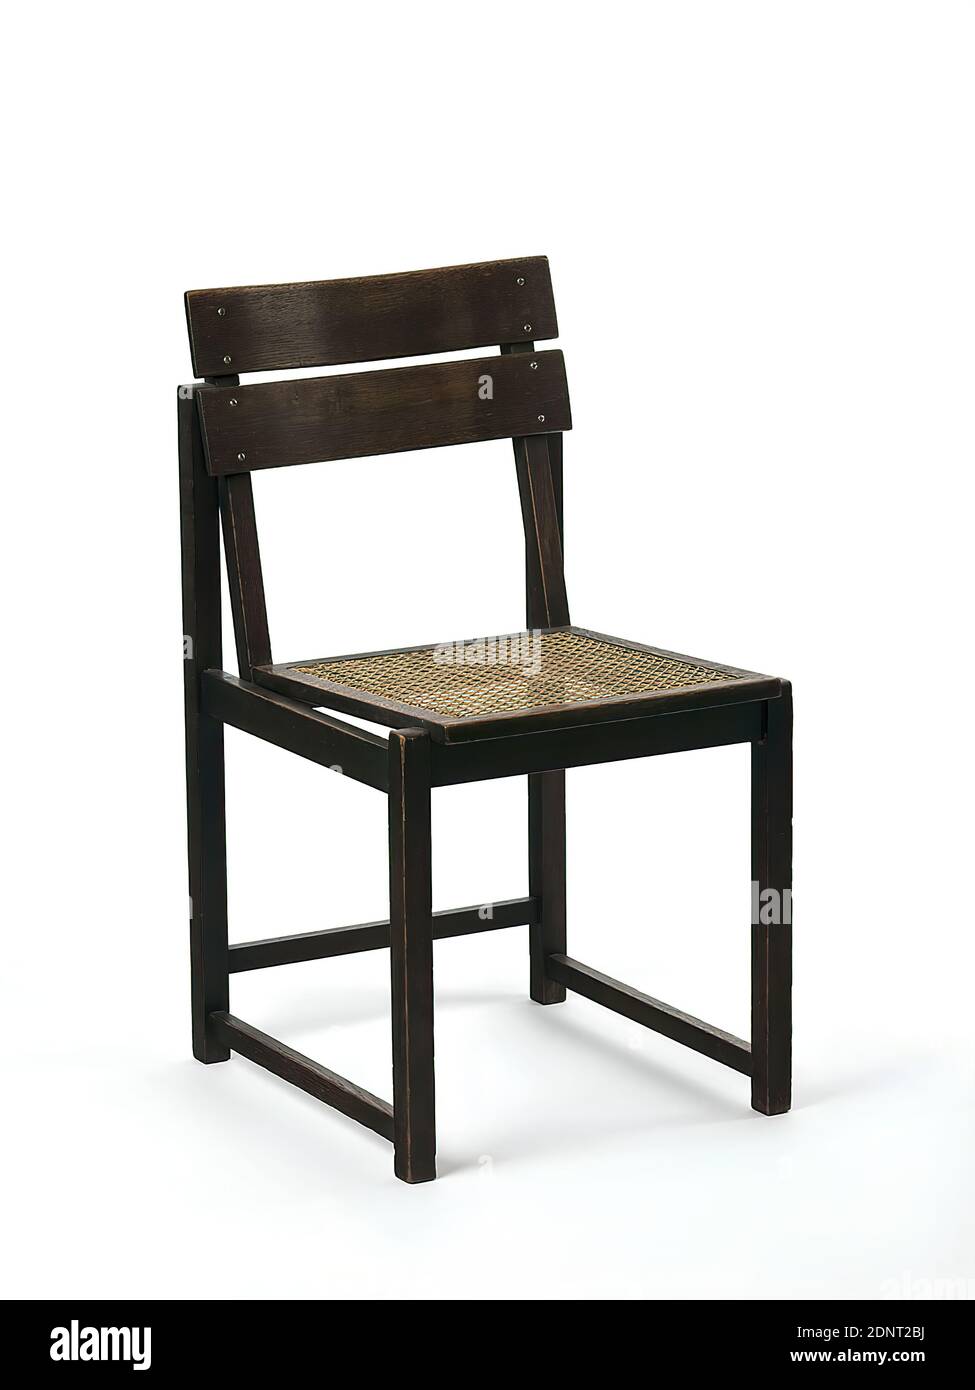 Staatliche Bauhochschule Weimar, Erich Dieckmann, chair with divided backrest, Hamburg, elm, rattan, stained, woven, elm wood, stained, and wickerwork, Total: Height: 80 cm; Width: 42 cm; Depth: 52 cm, on the underside with chalk illegibly marked, furniture, seating, chairs, Bauhaus Stock Photo